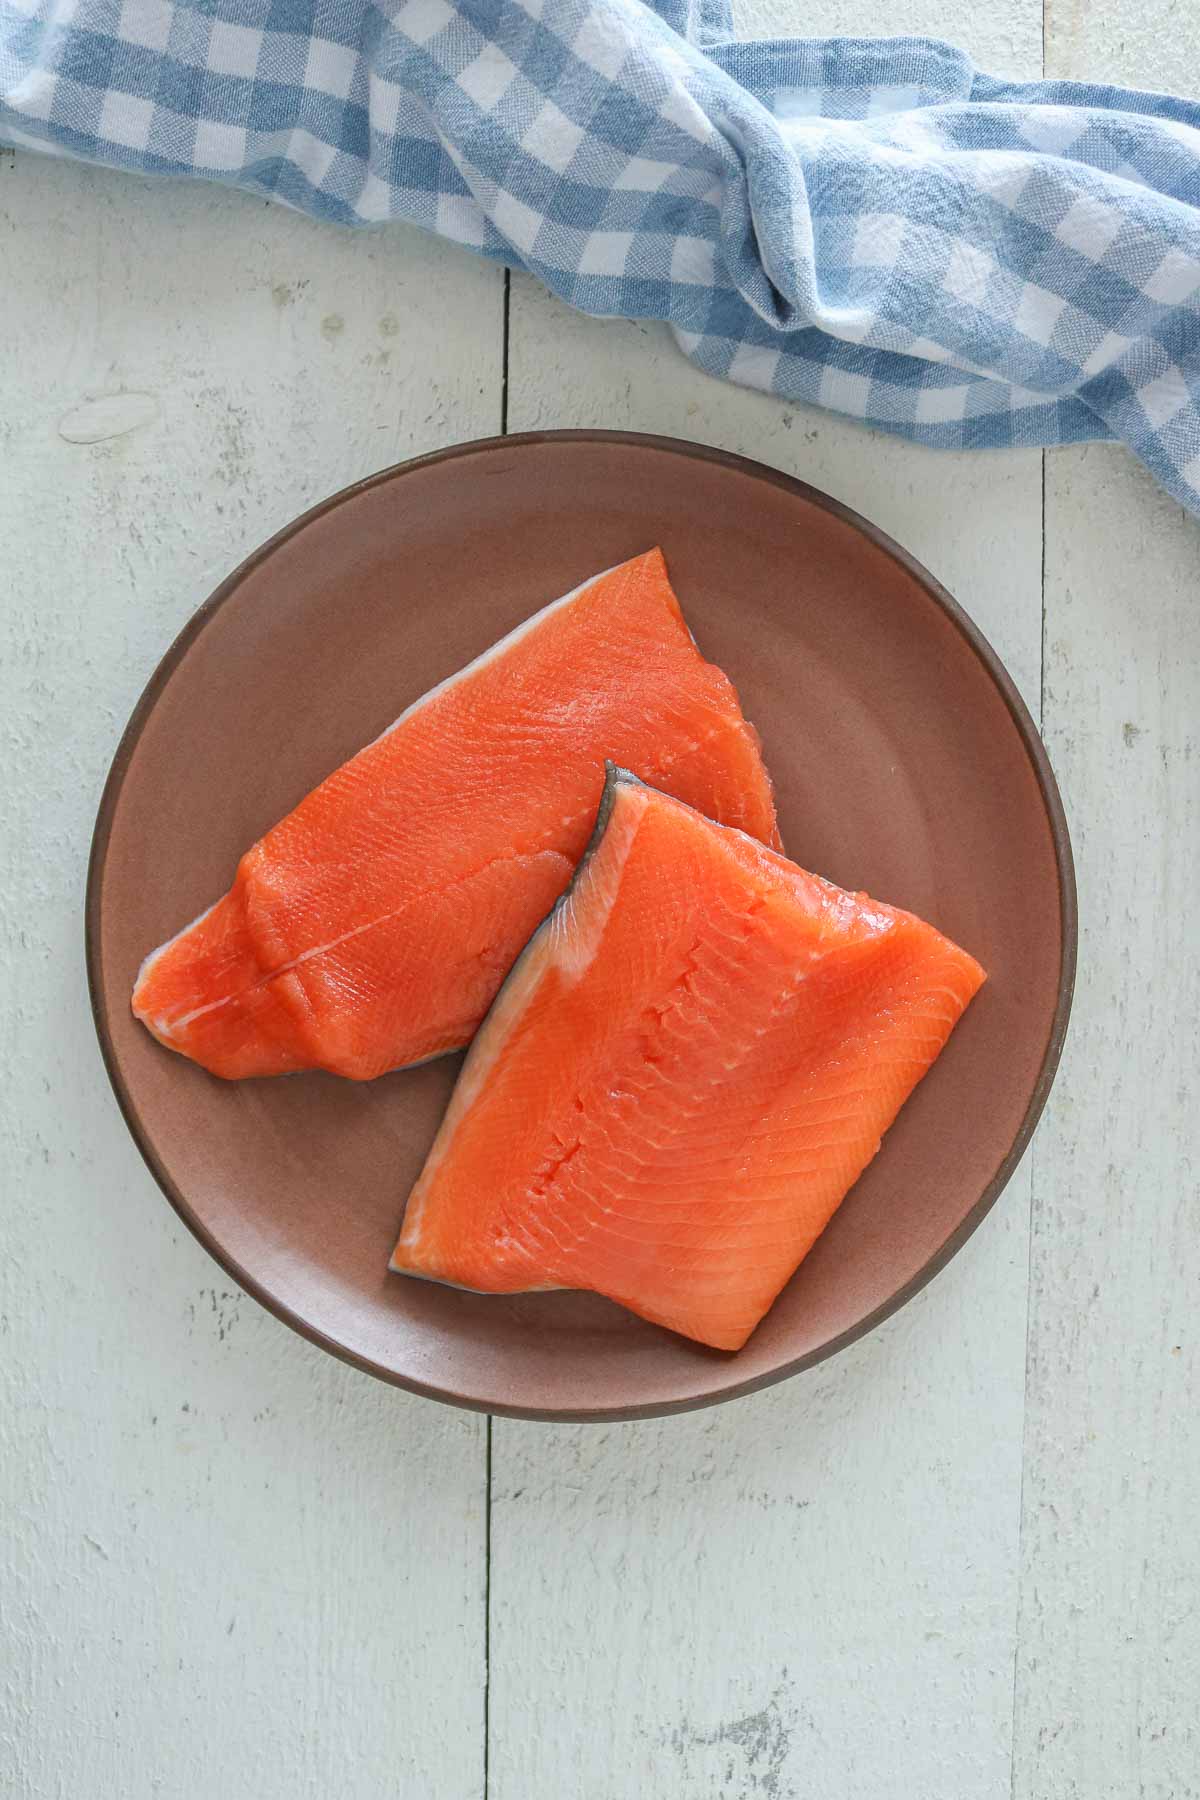 Two uncooked arctic char fillets on a brown plate.